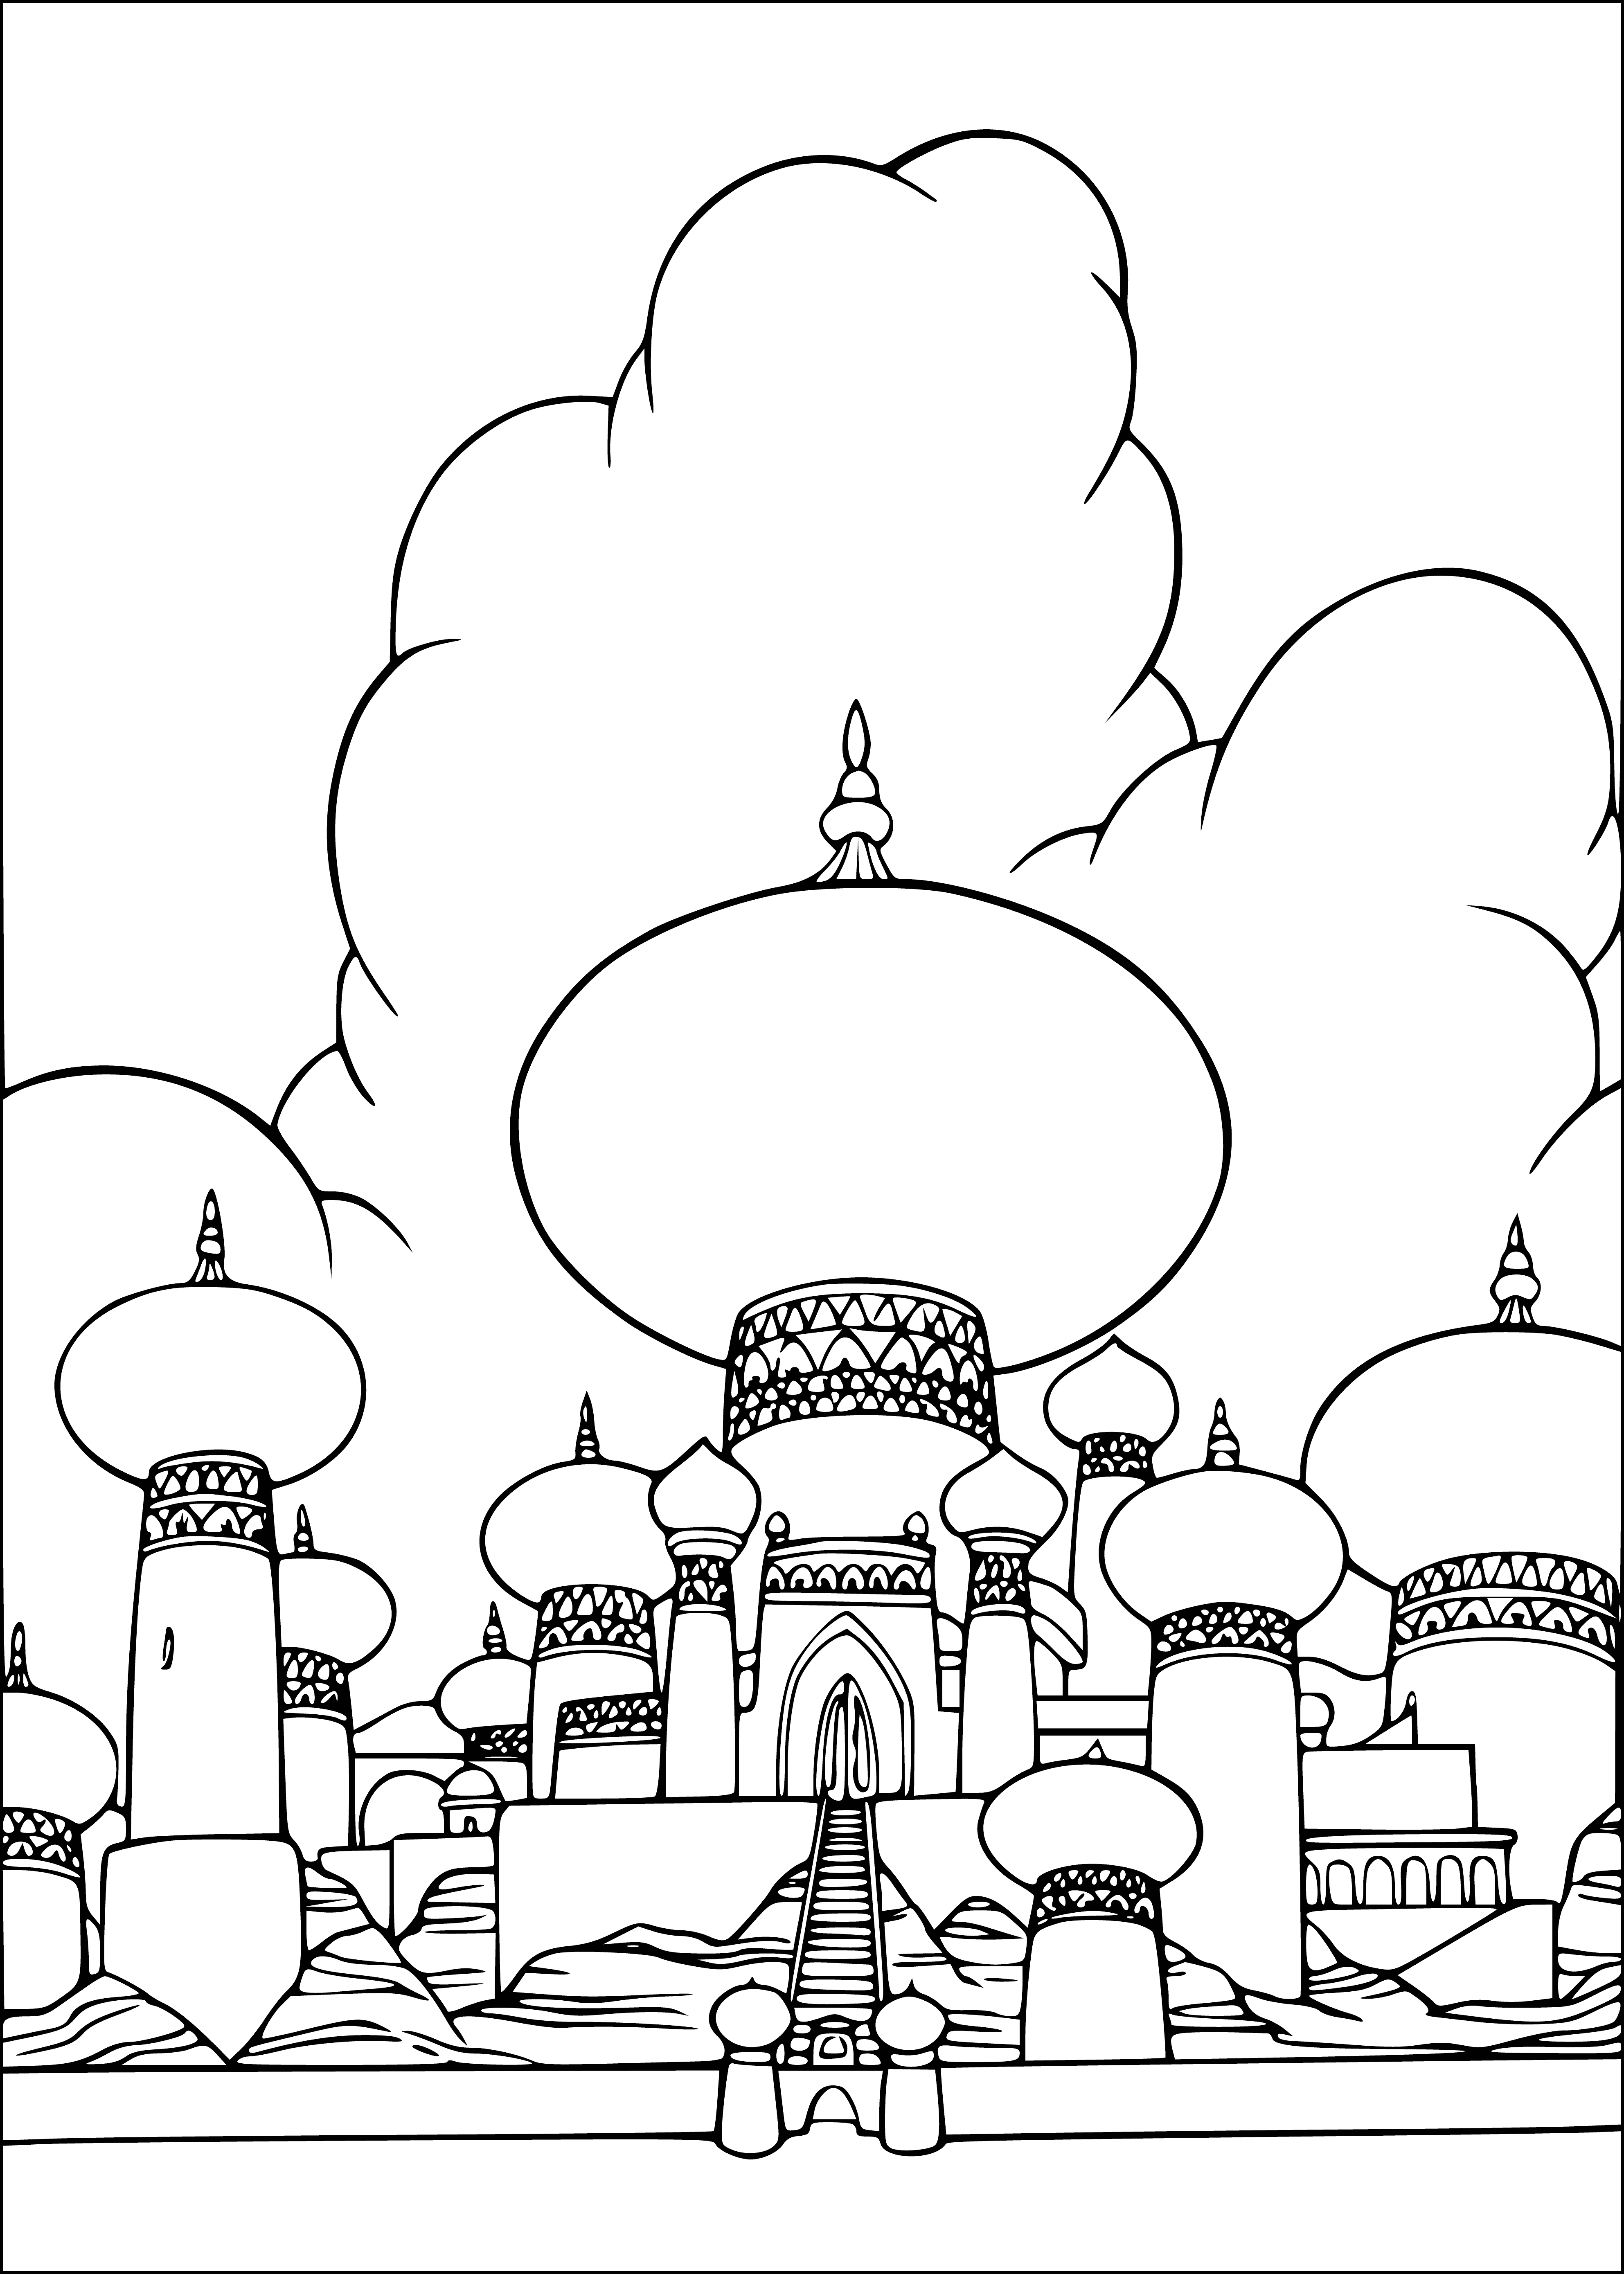 Agraba coloring page